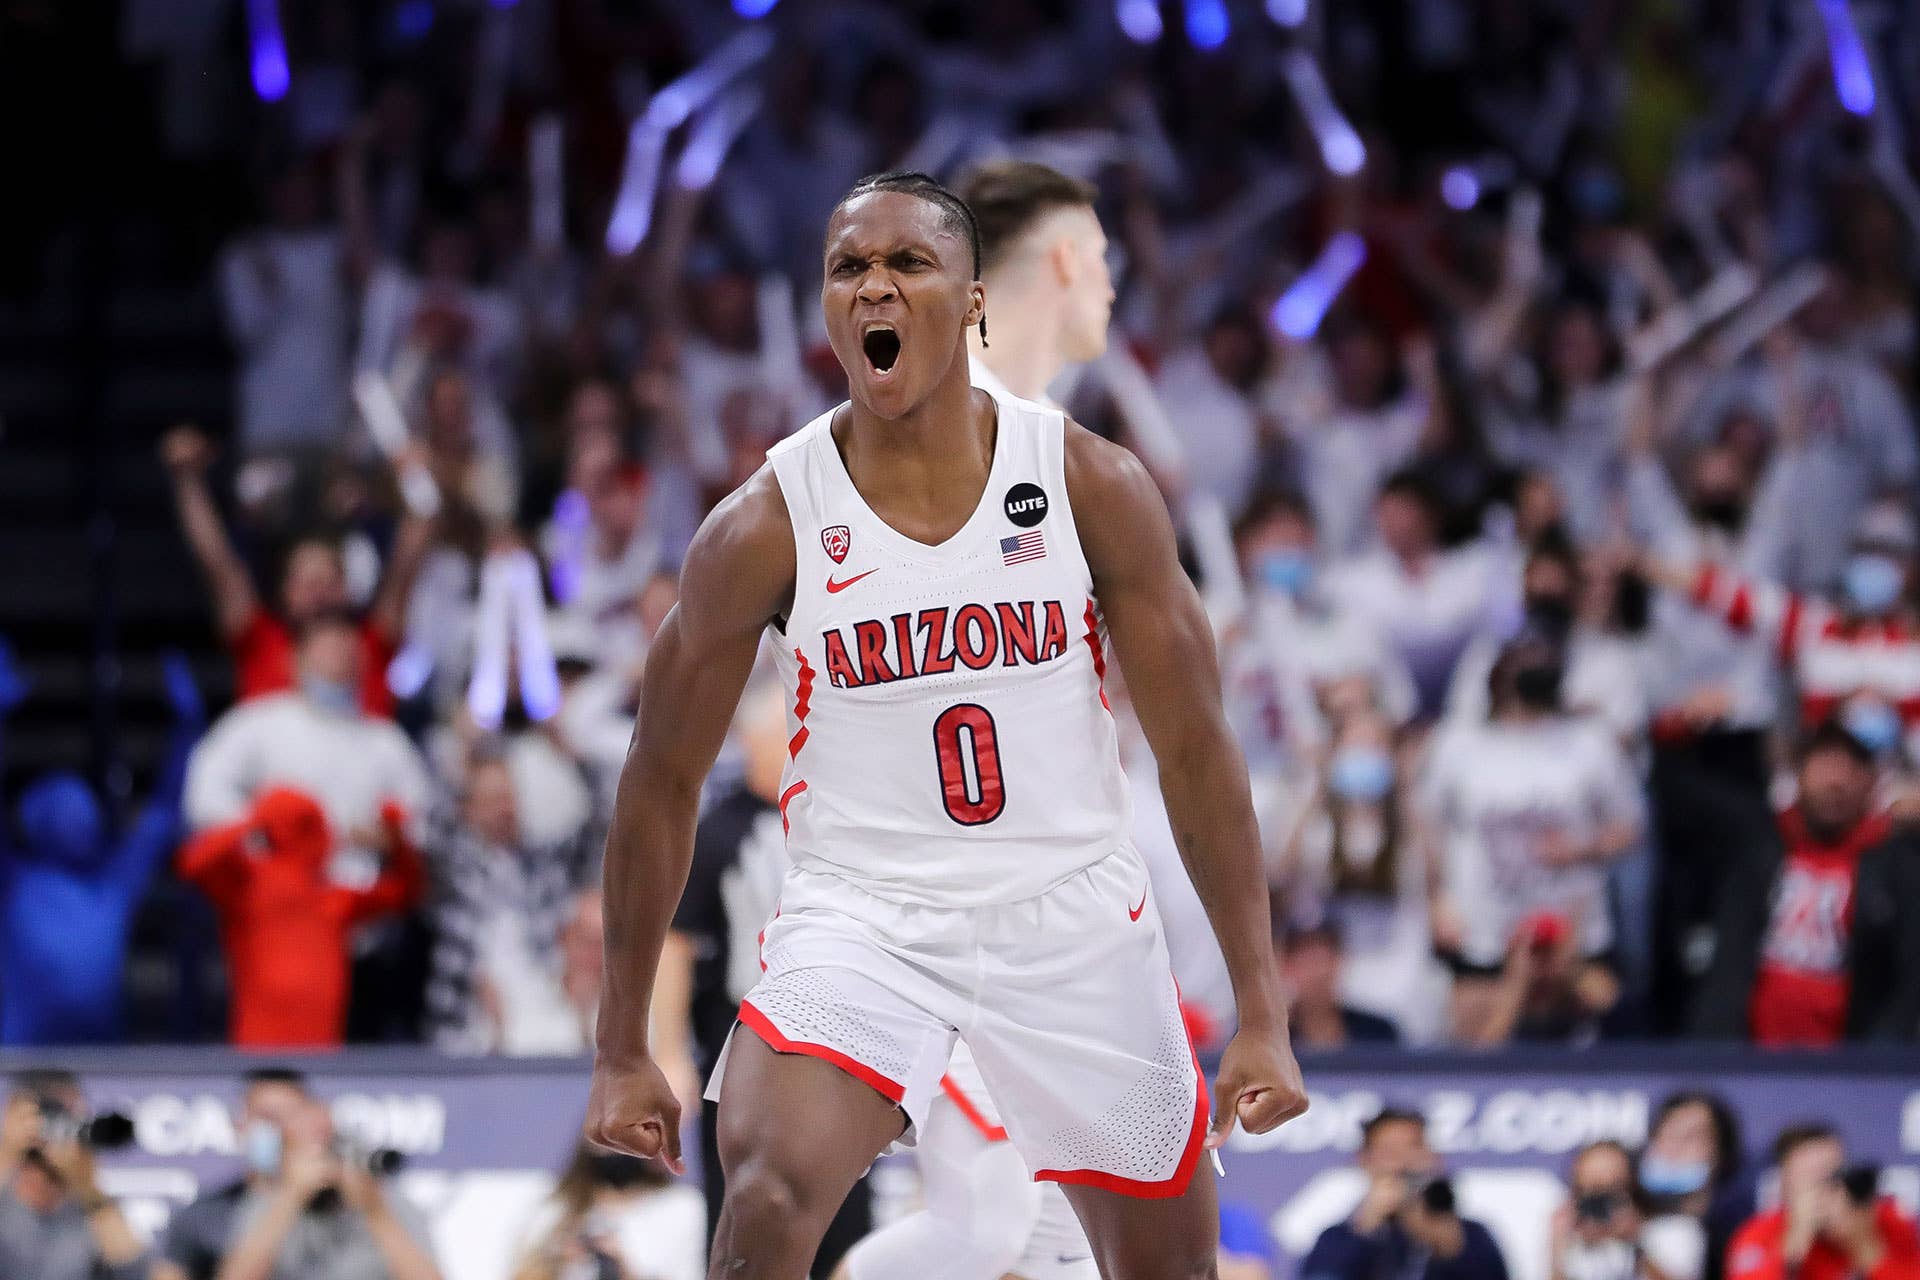 Guard Bennedict Mathurin #0 of the Arizona Wildcats roars during the game against the Oregon Ducks